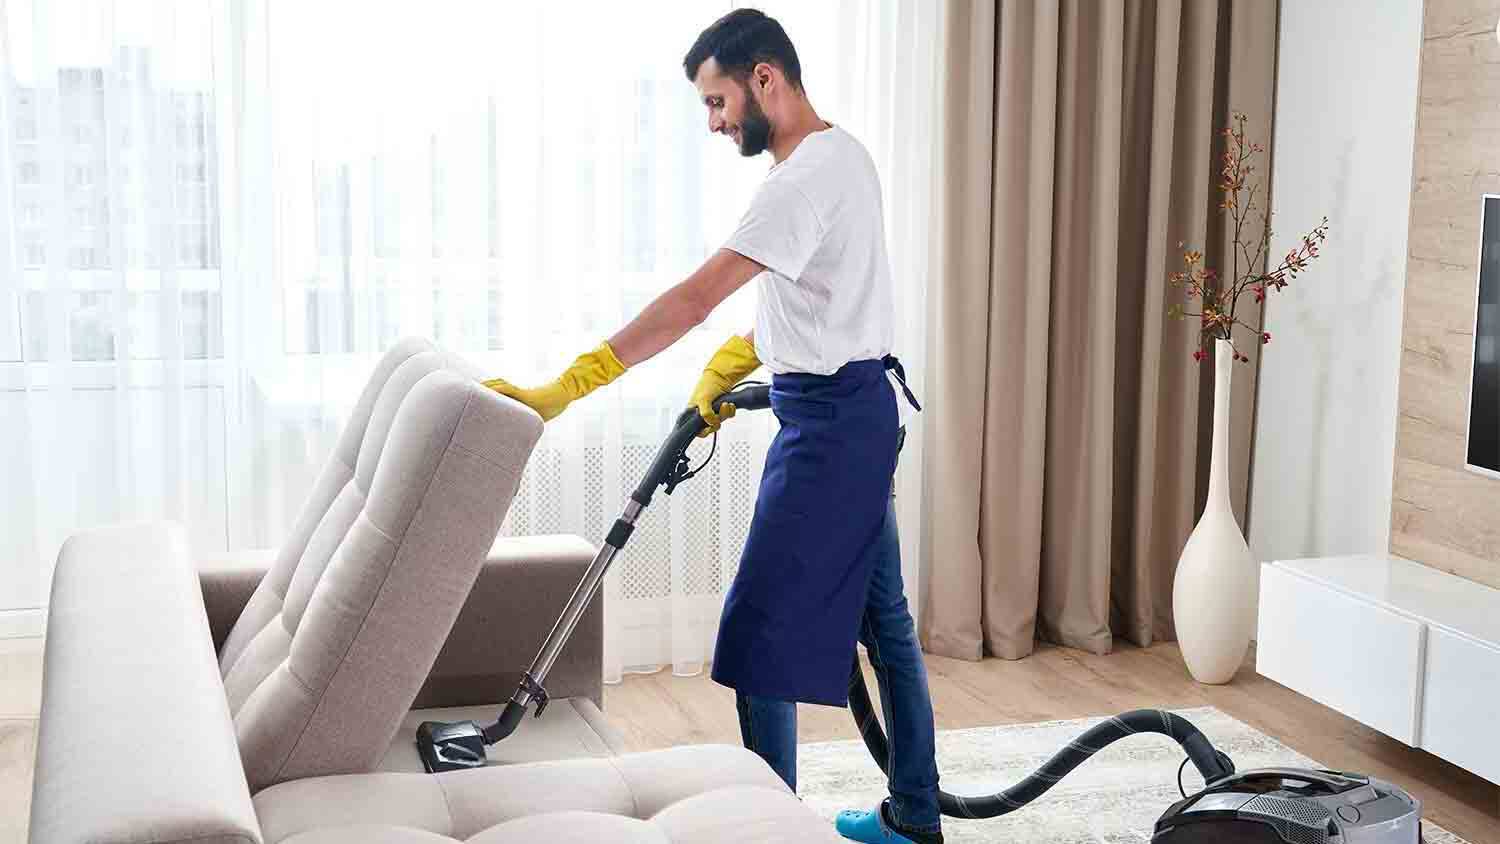 How To Start My Own Cleaning Service Business